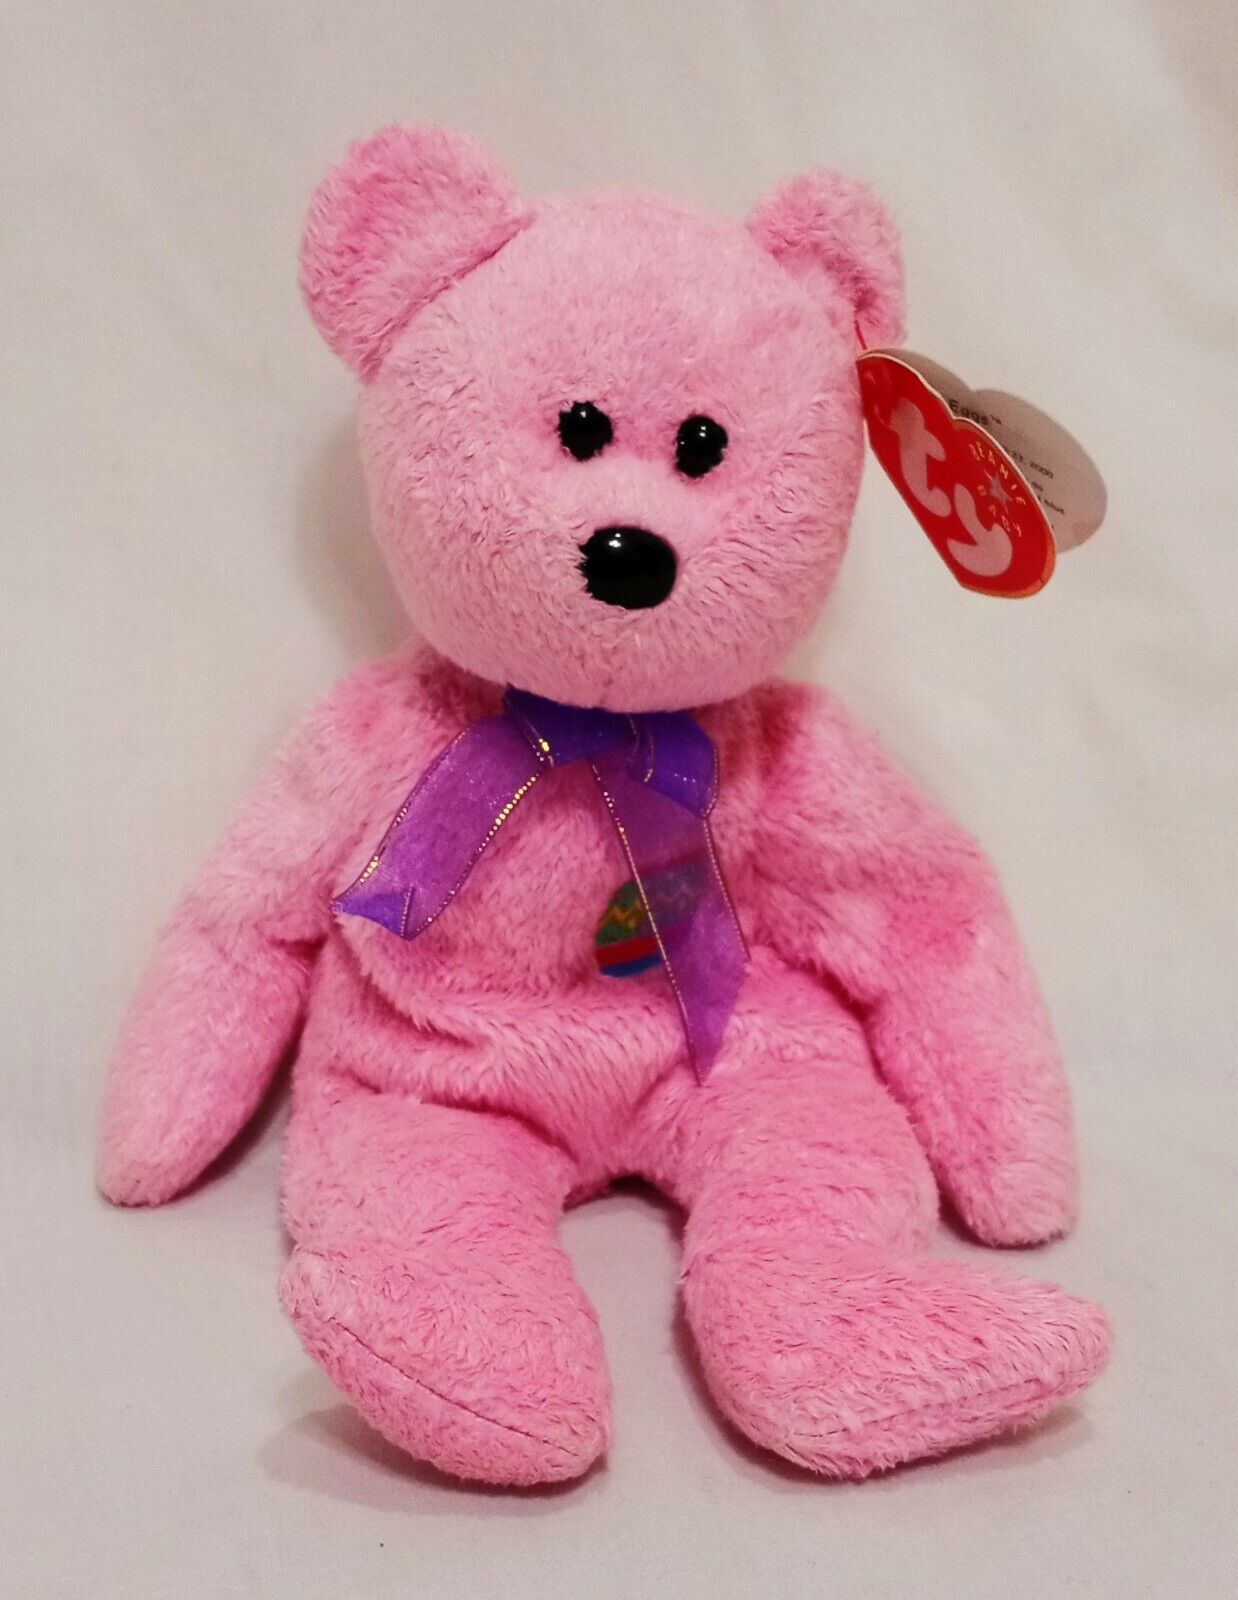 Primary image for Eggs Teddy Bear Ty Beanie Baby Plush Stuffed Animal 8" Pink 2000 